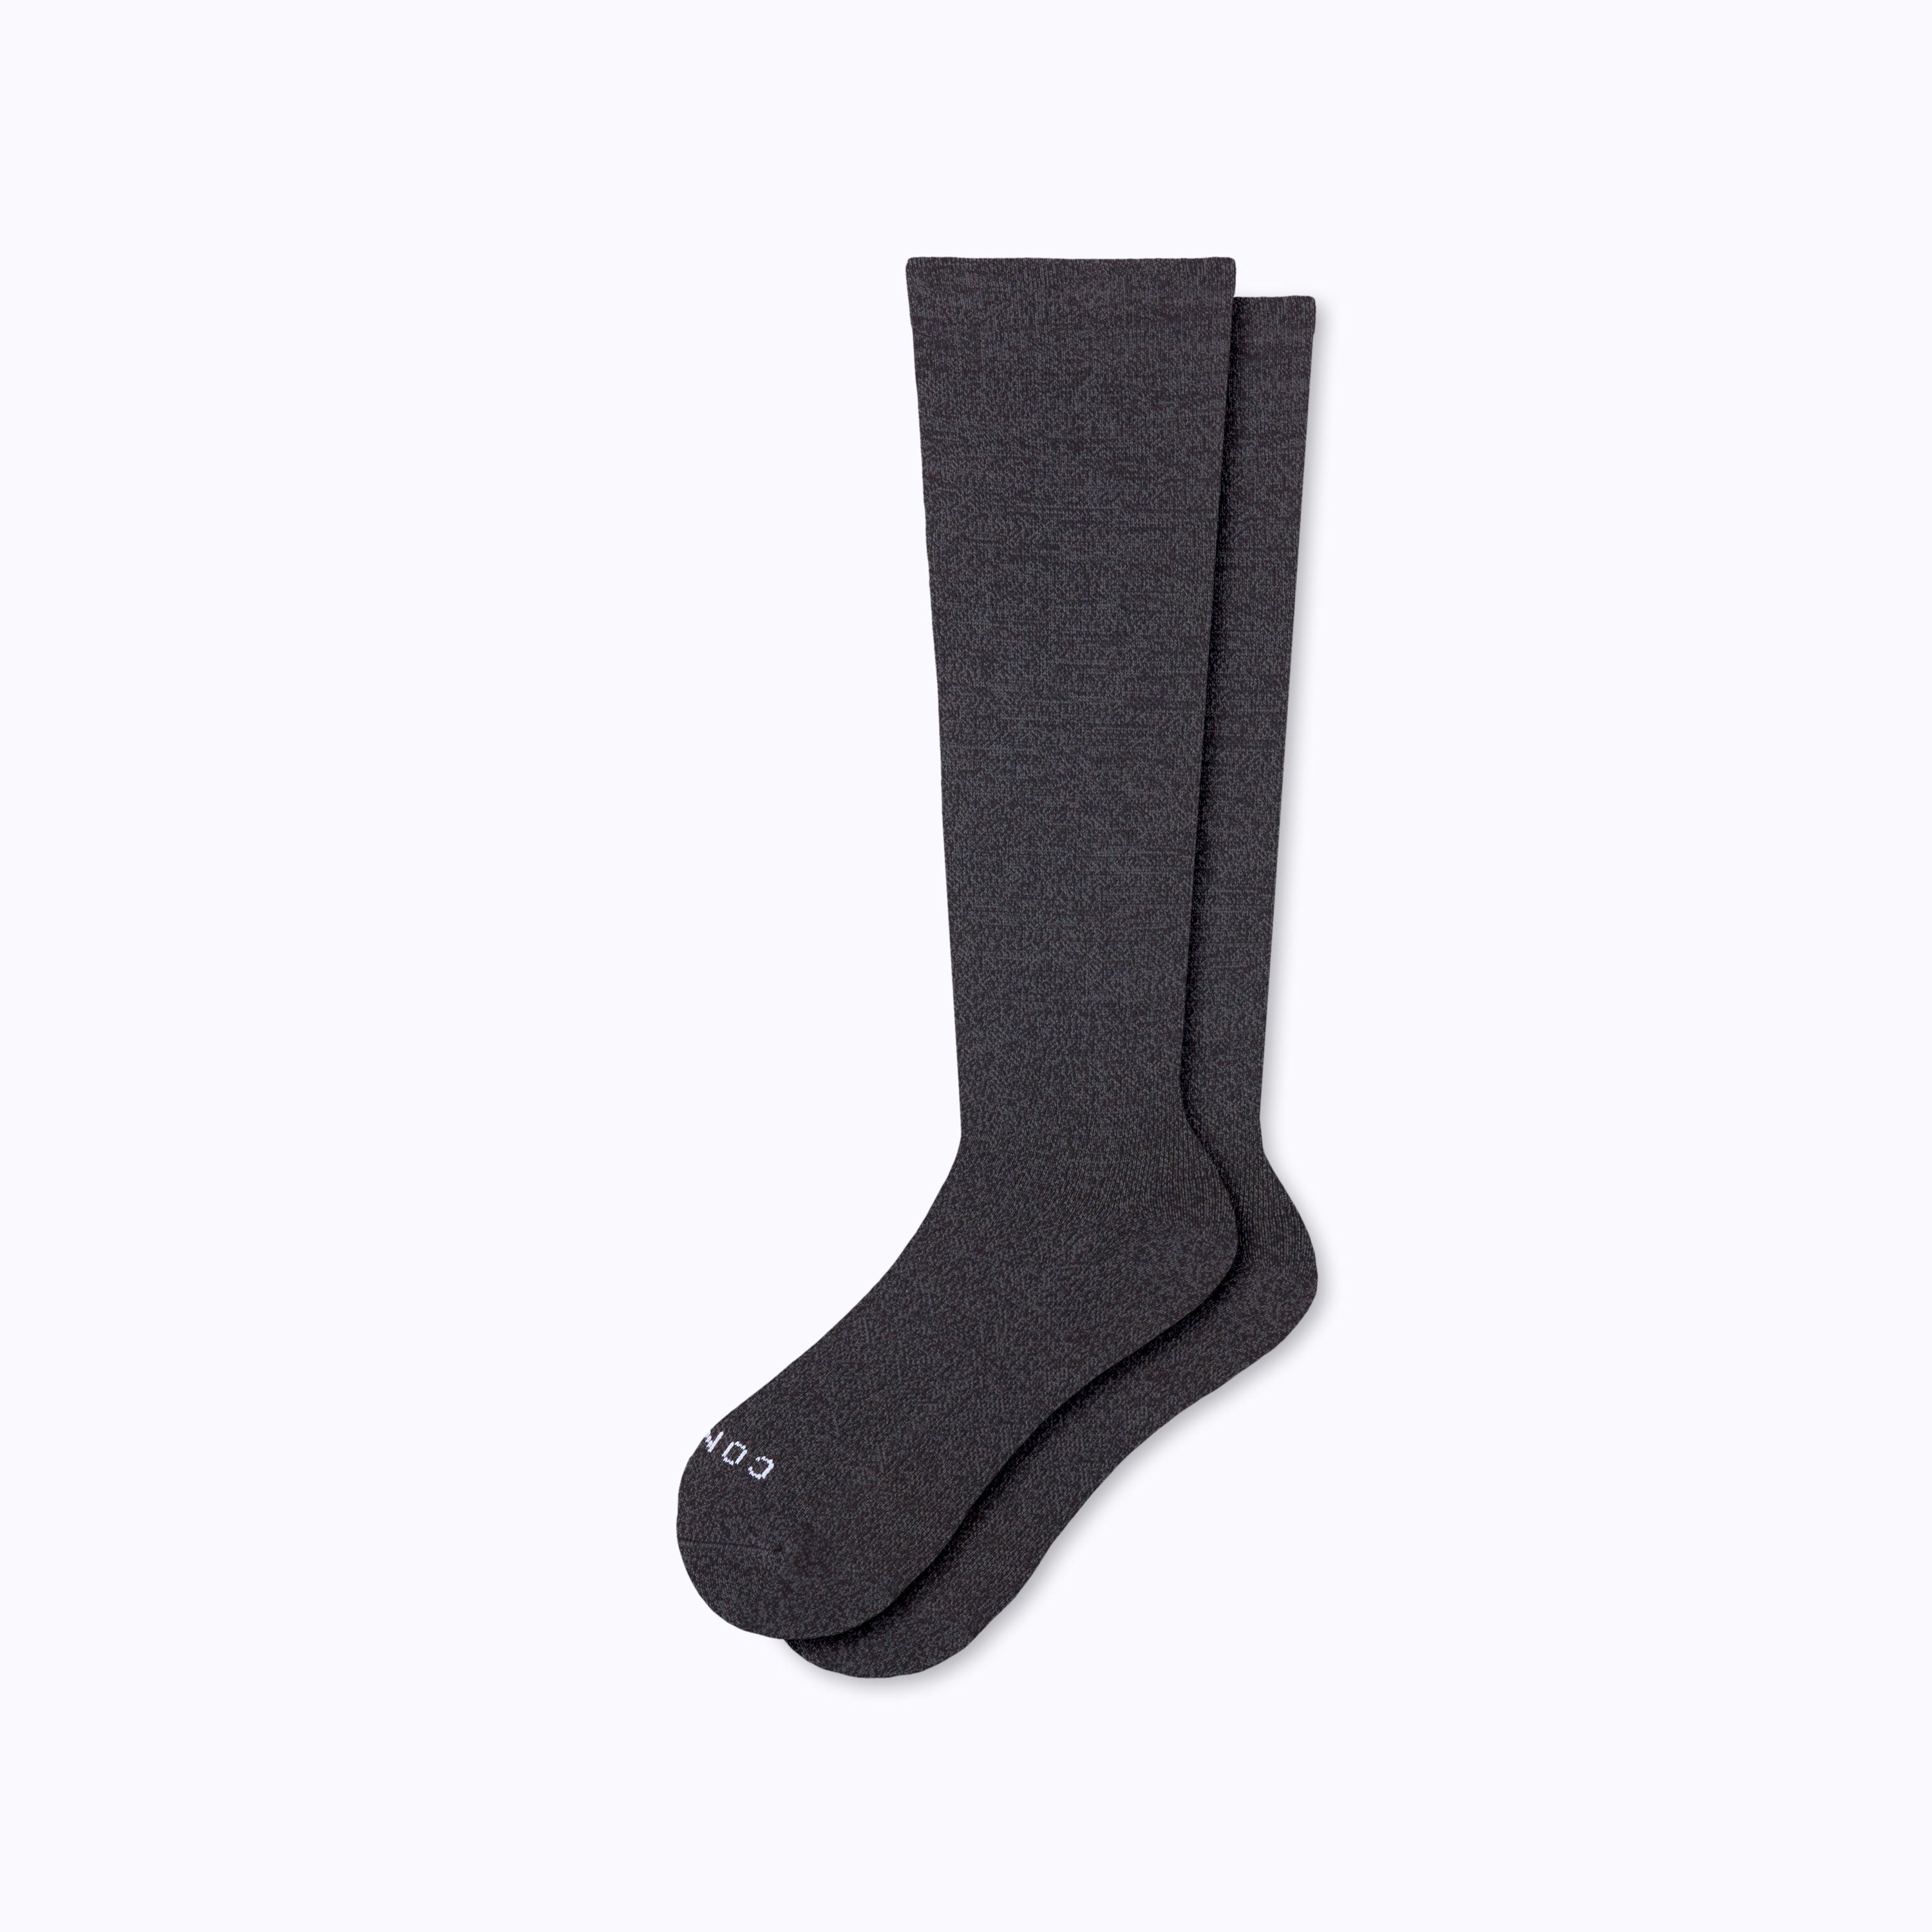 Psssst. We've launched a new product! Introducing Allies, the ankle  compression sock. It's the perfect everyday sock for everything you do. 🧦  Check it, By Comrad Socks